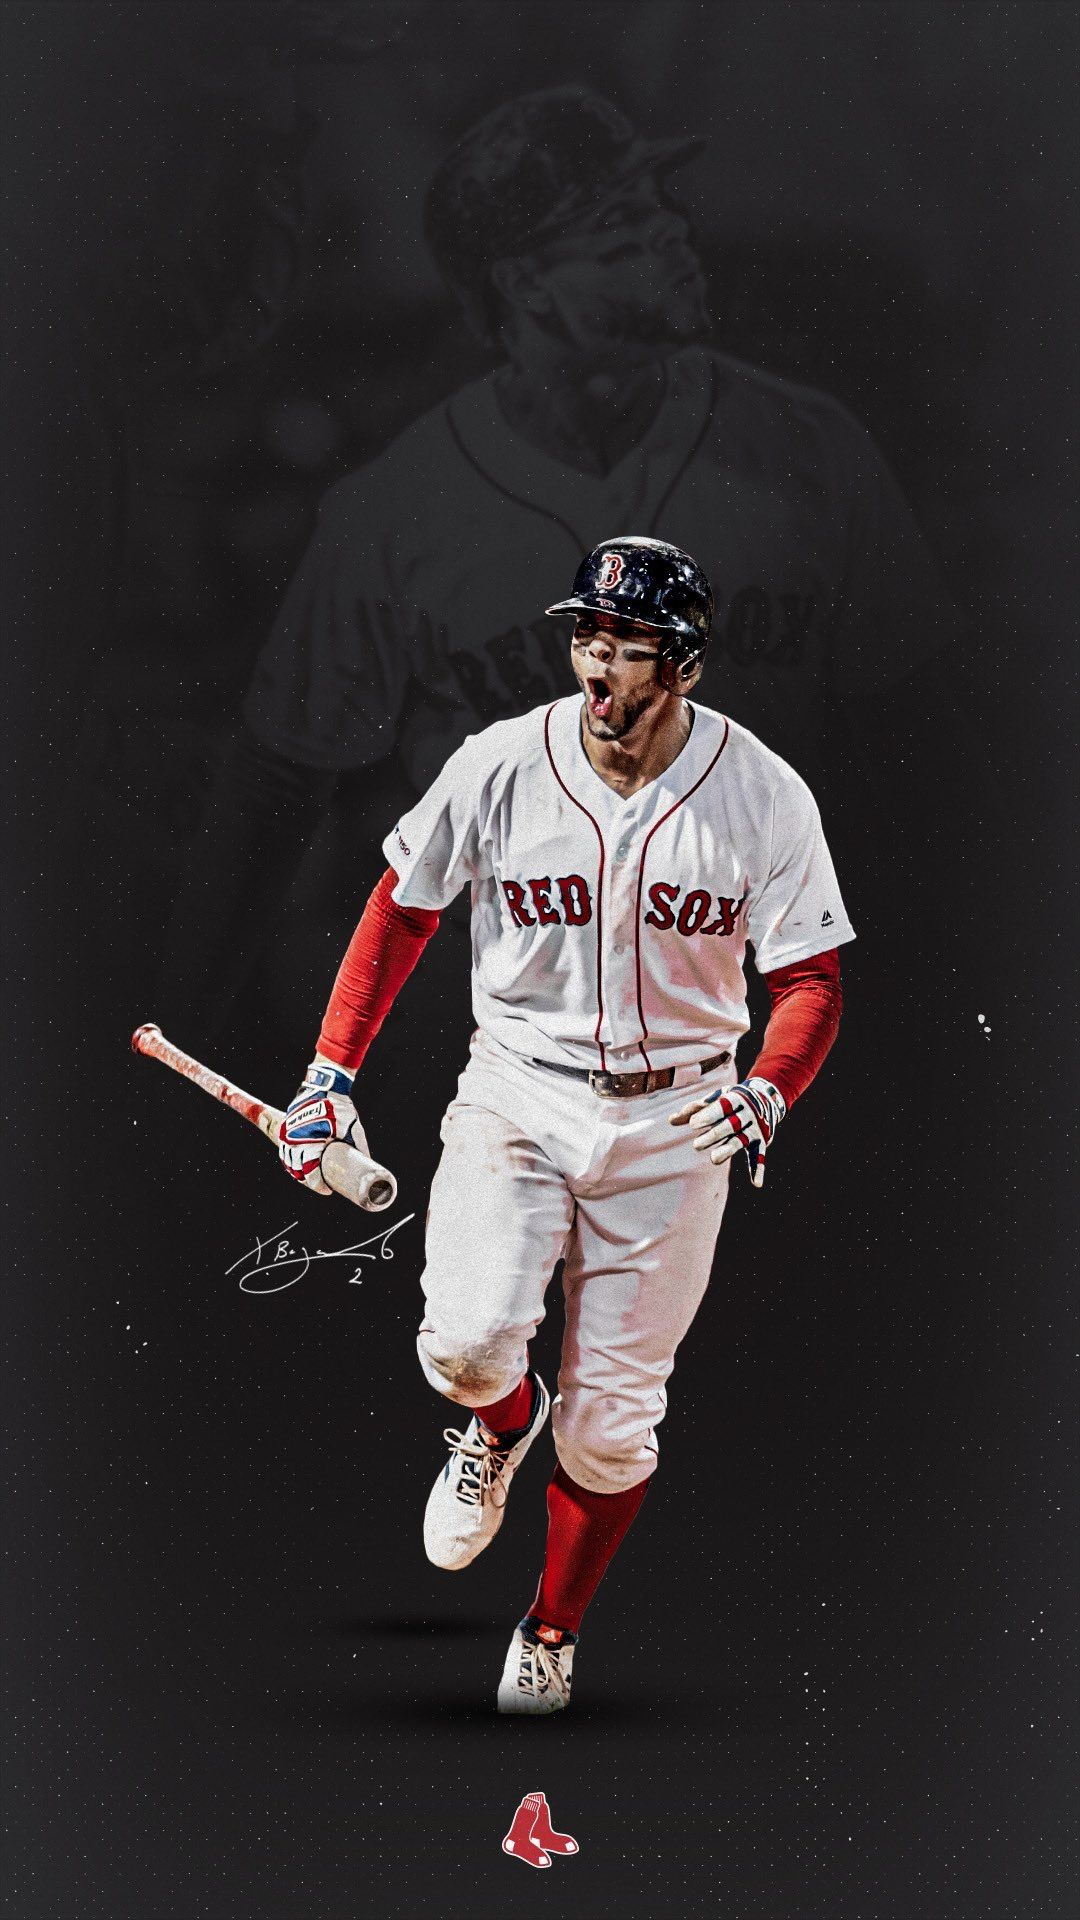 1080x1920 Pin by Jerry Baro on Red Sox | Boston red sox players, Red sox, Boston red sox